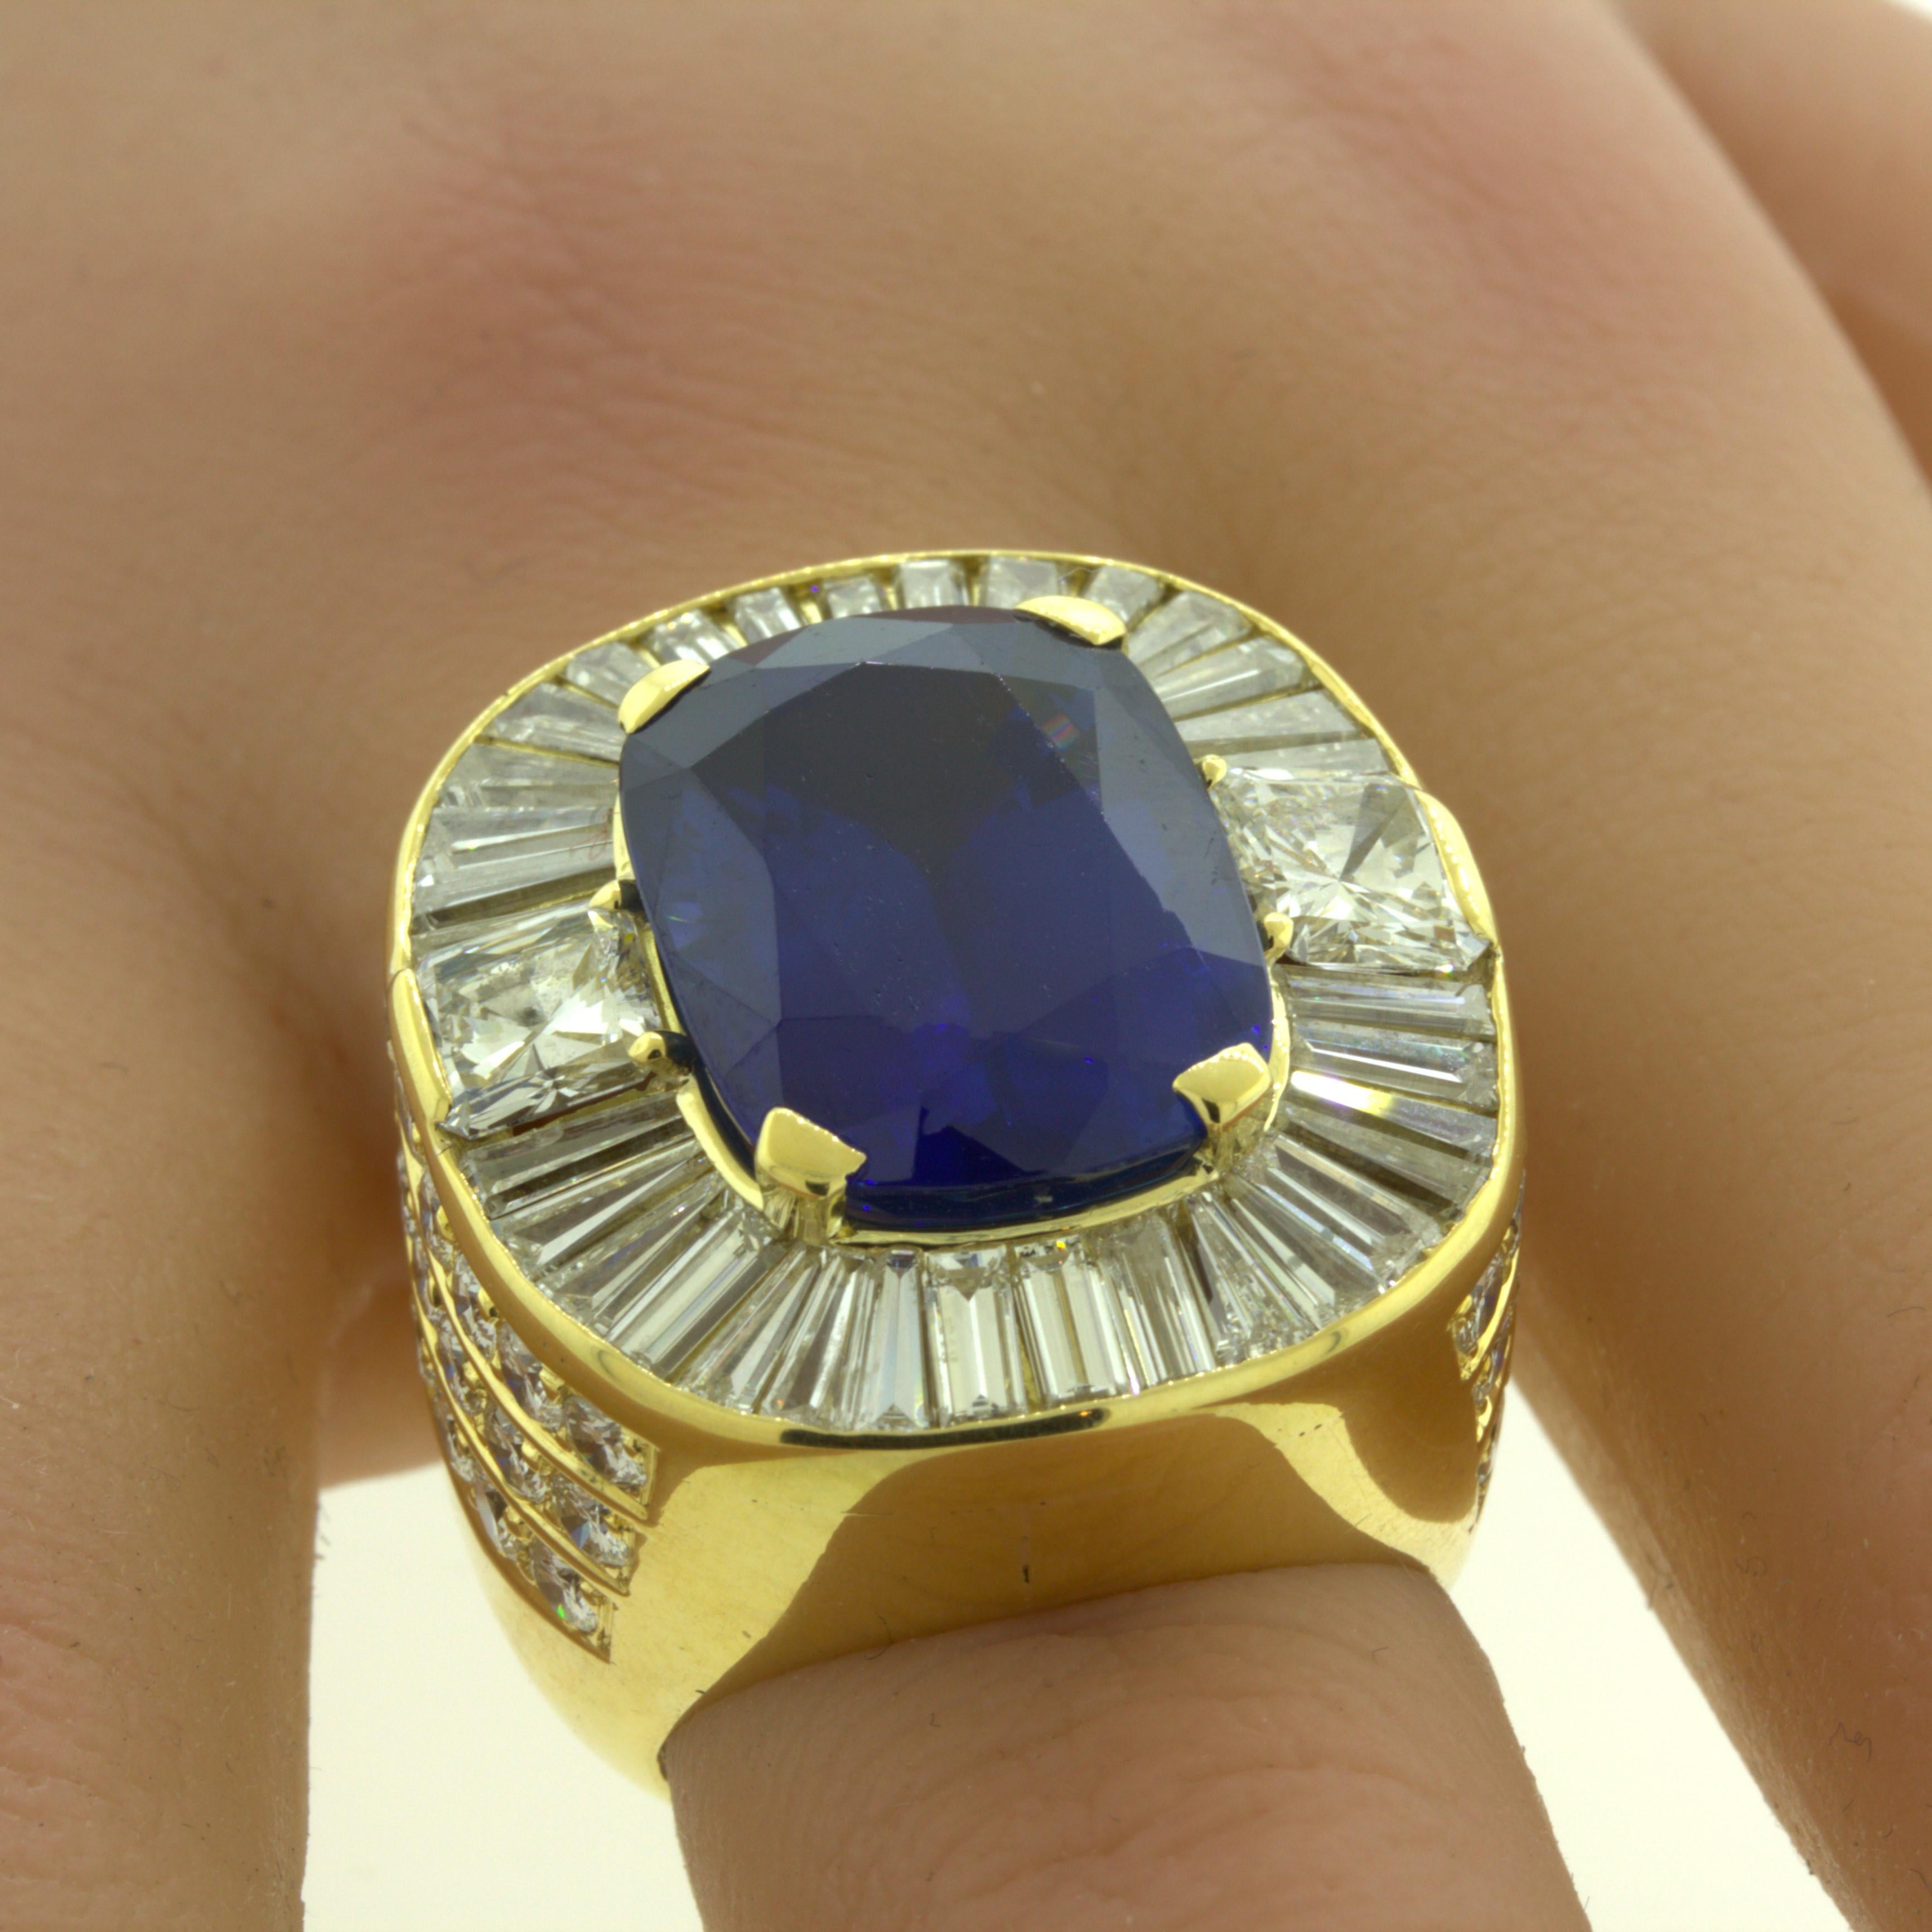 19.36 Carat Ceylon Sapphire Diamond 18K Yellow Gold Cocktail Ring, GIA Certified For Sale 6